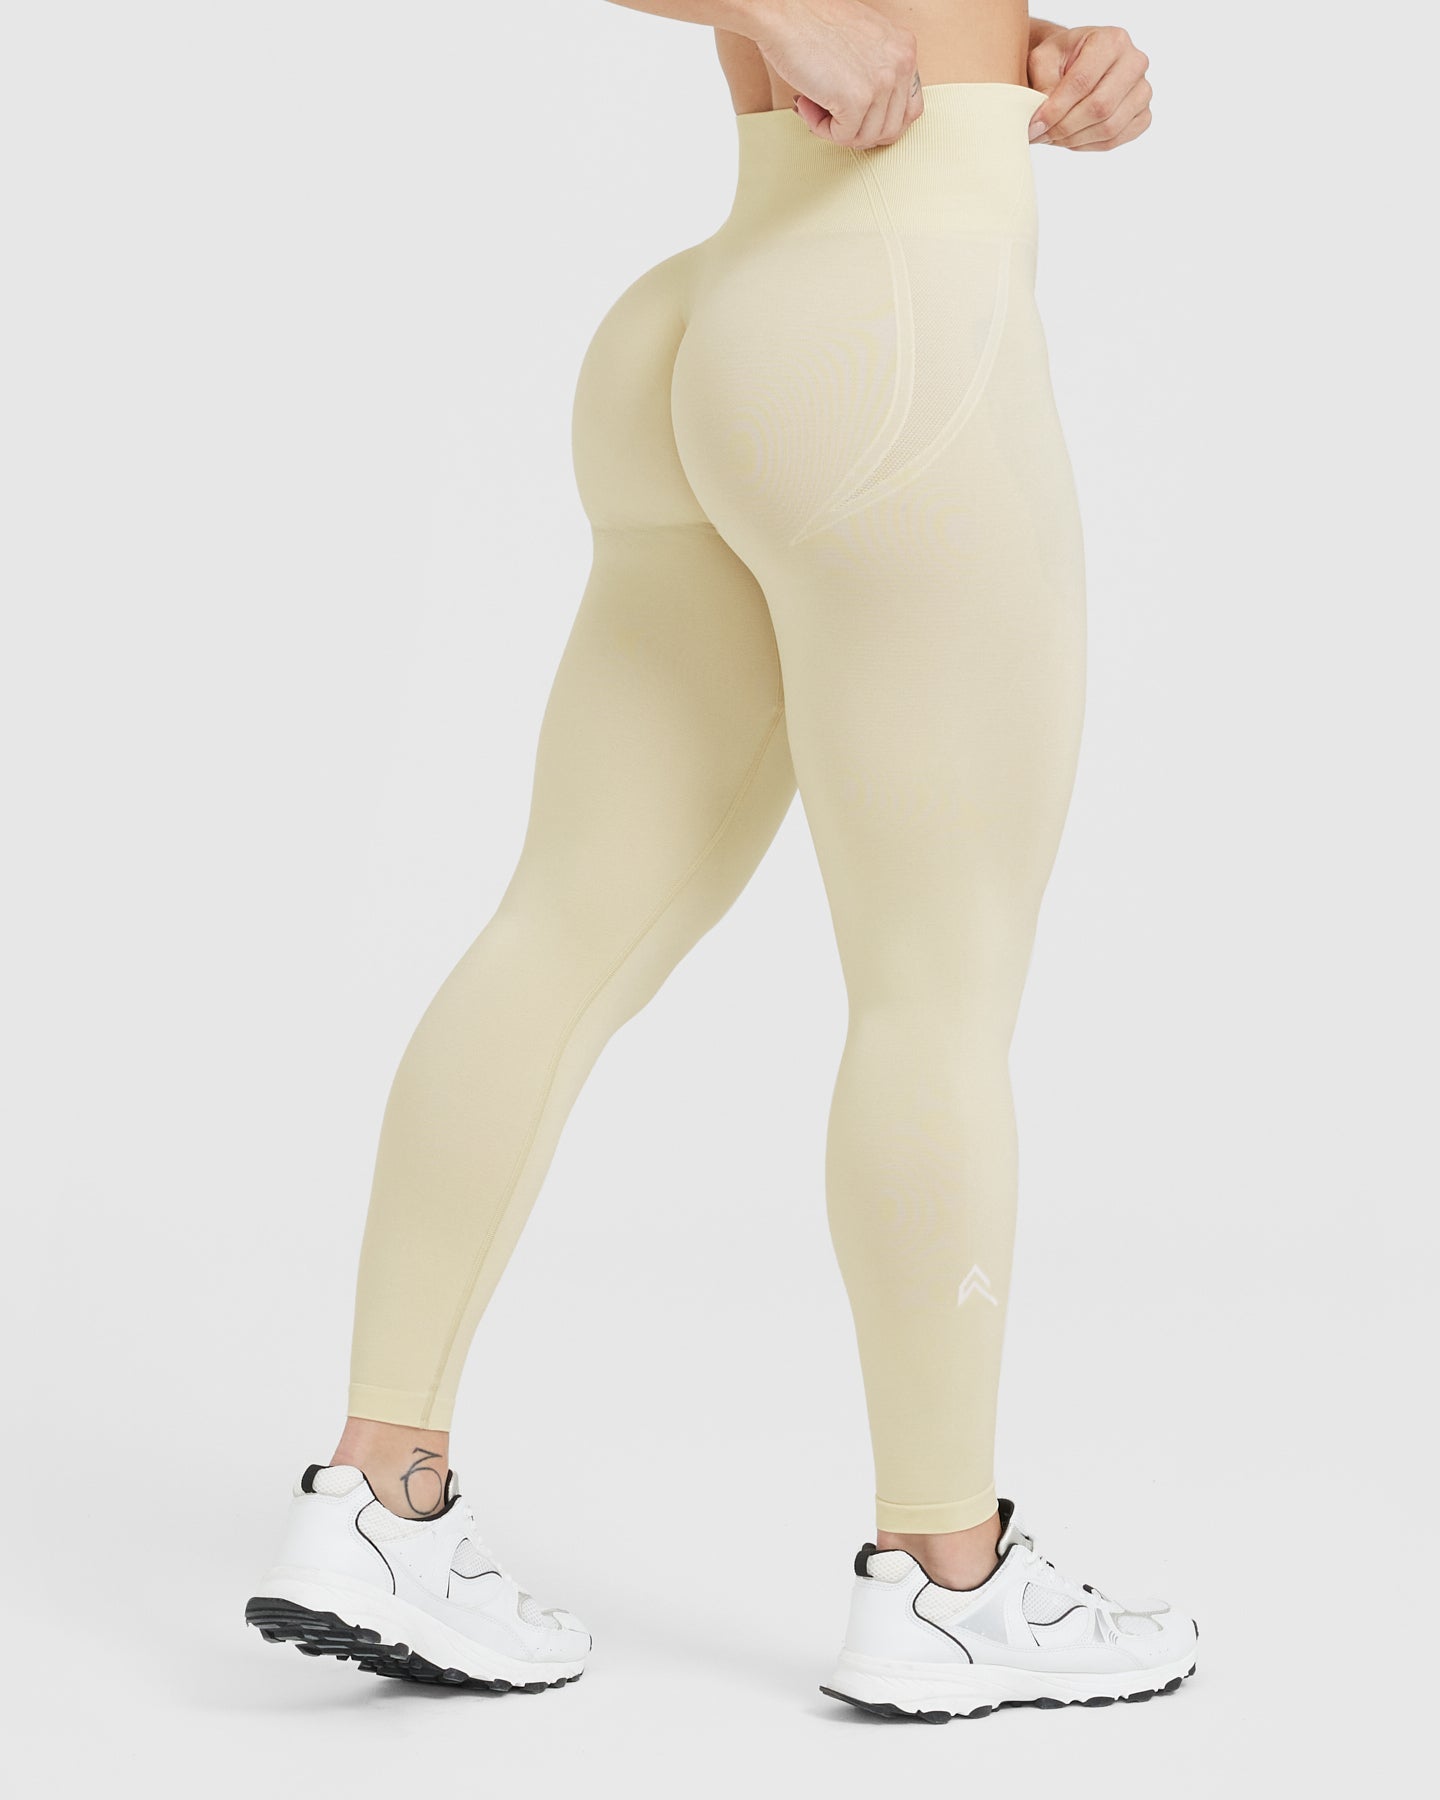 Oner Active Effortless Seamless Leggings Tan Size L - $55 New With Tags -  From Mckenzie